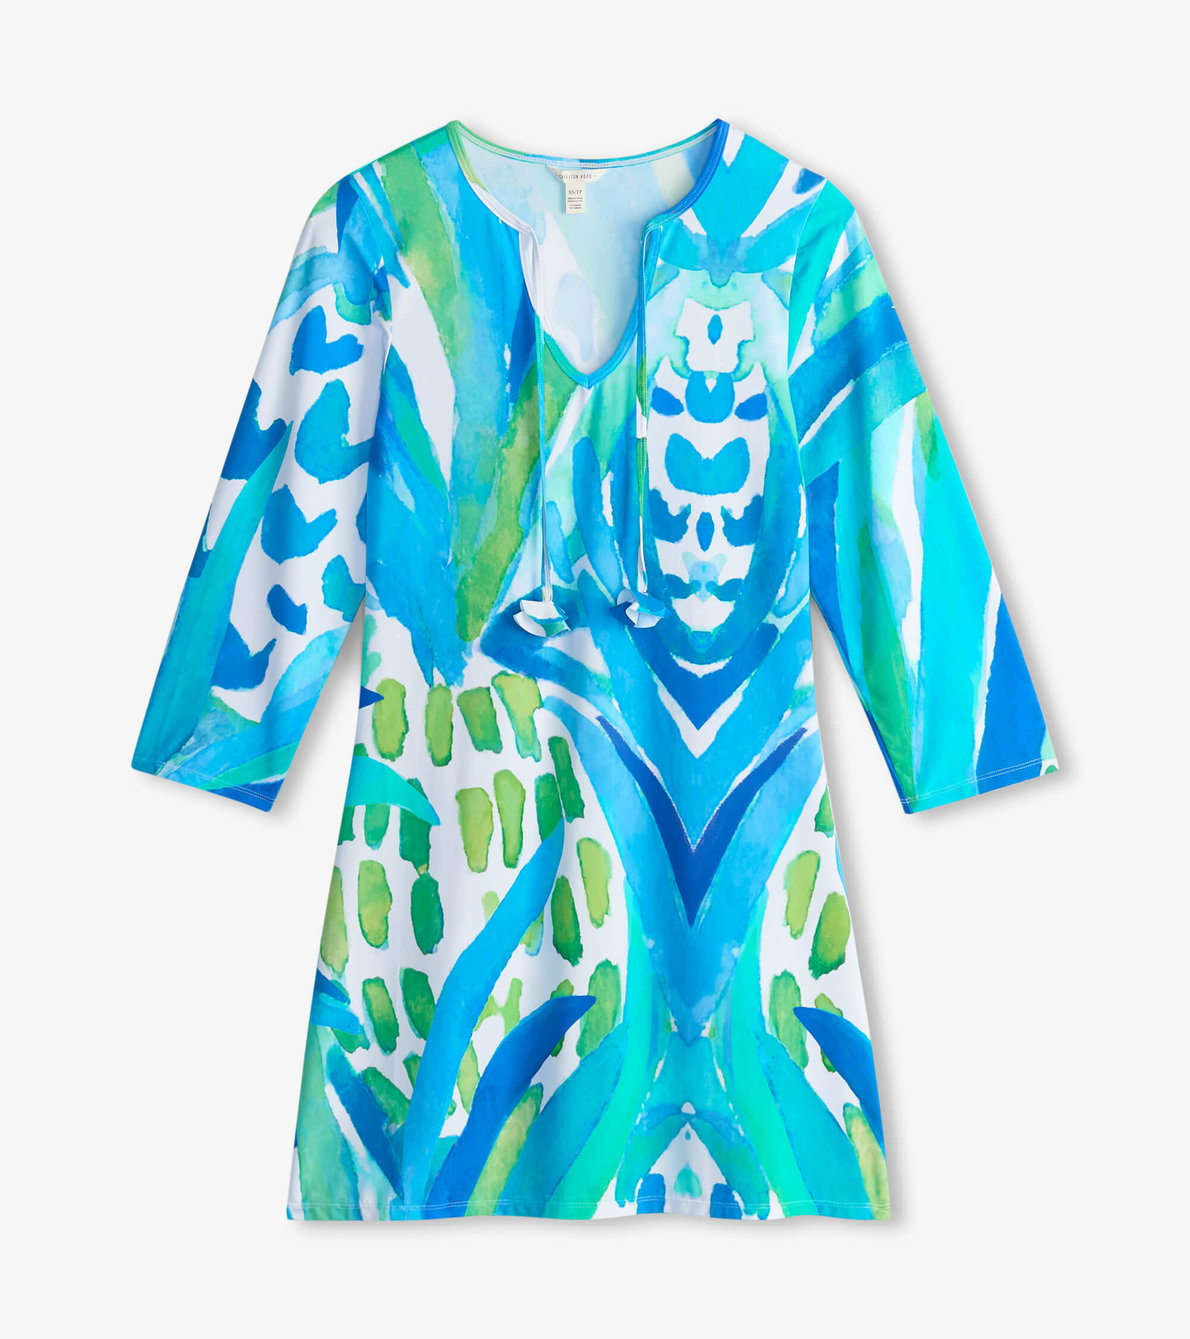 View larger image of Women's Painted Pineapple Seaside Beach Dress